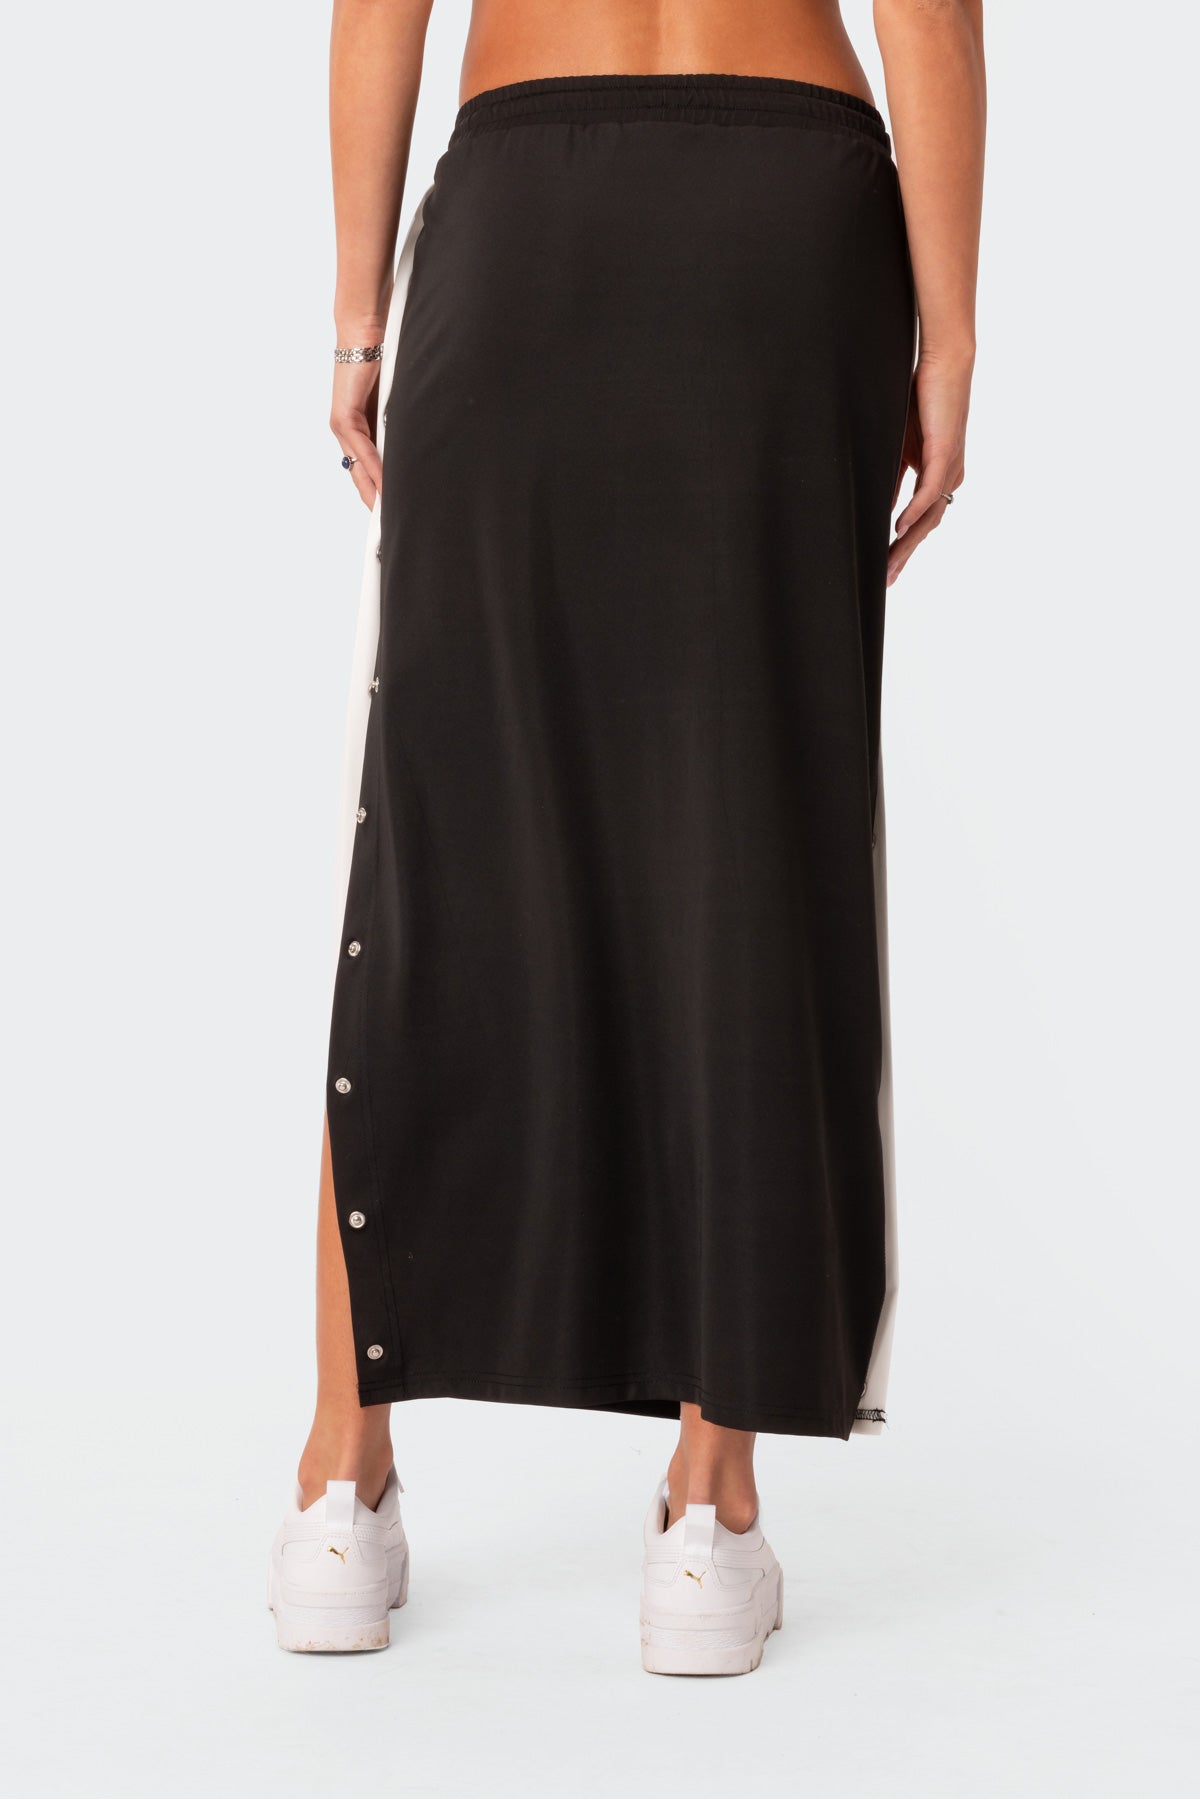 Athletic Low Rise Maxi Skirt